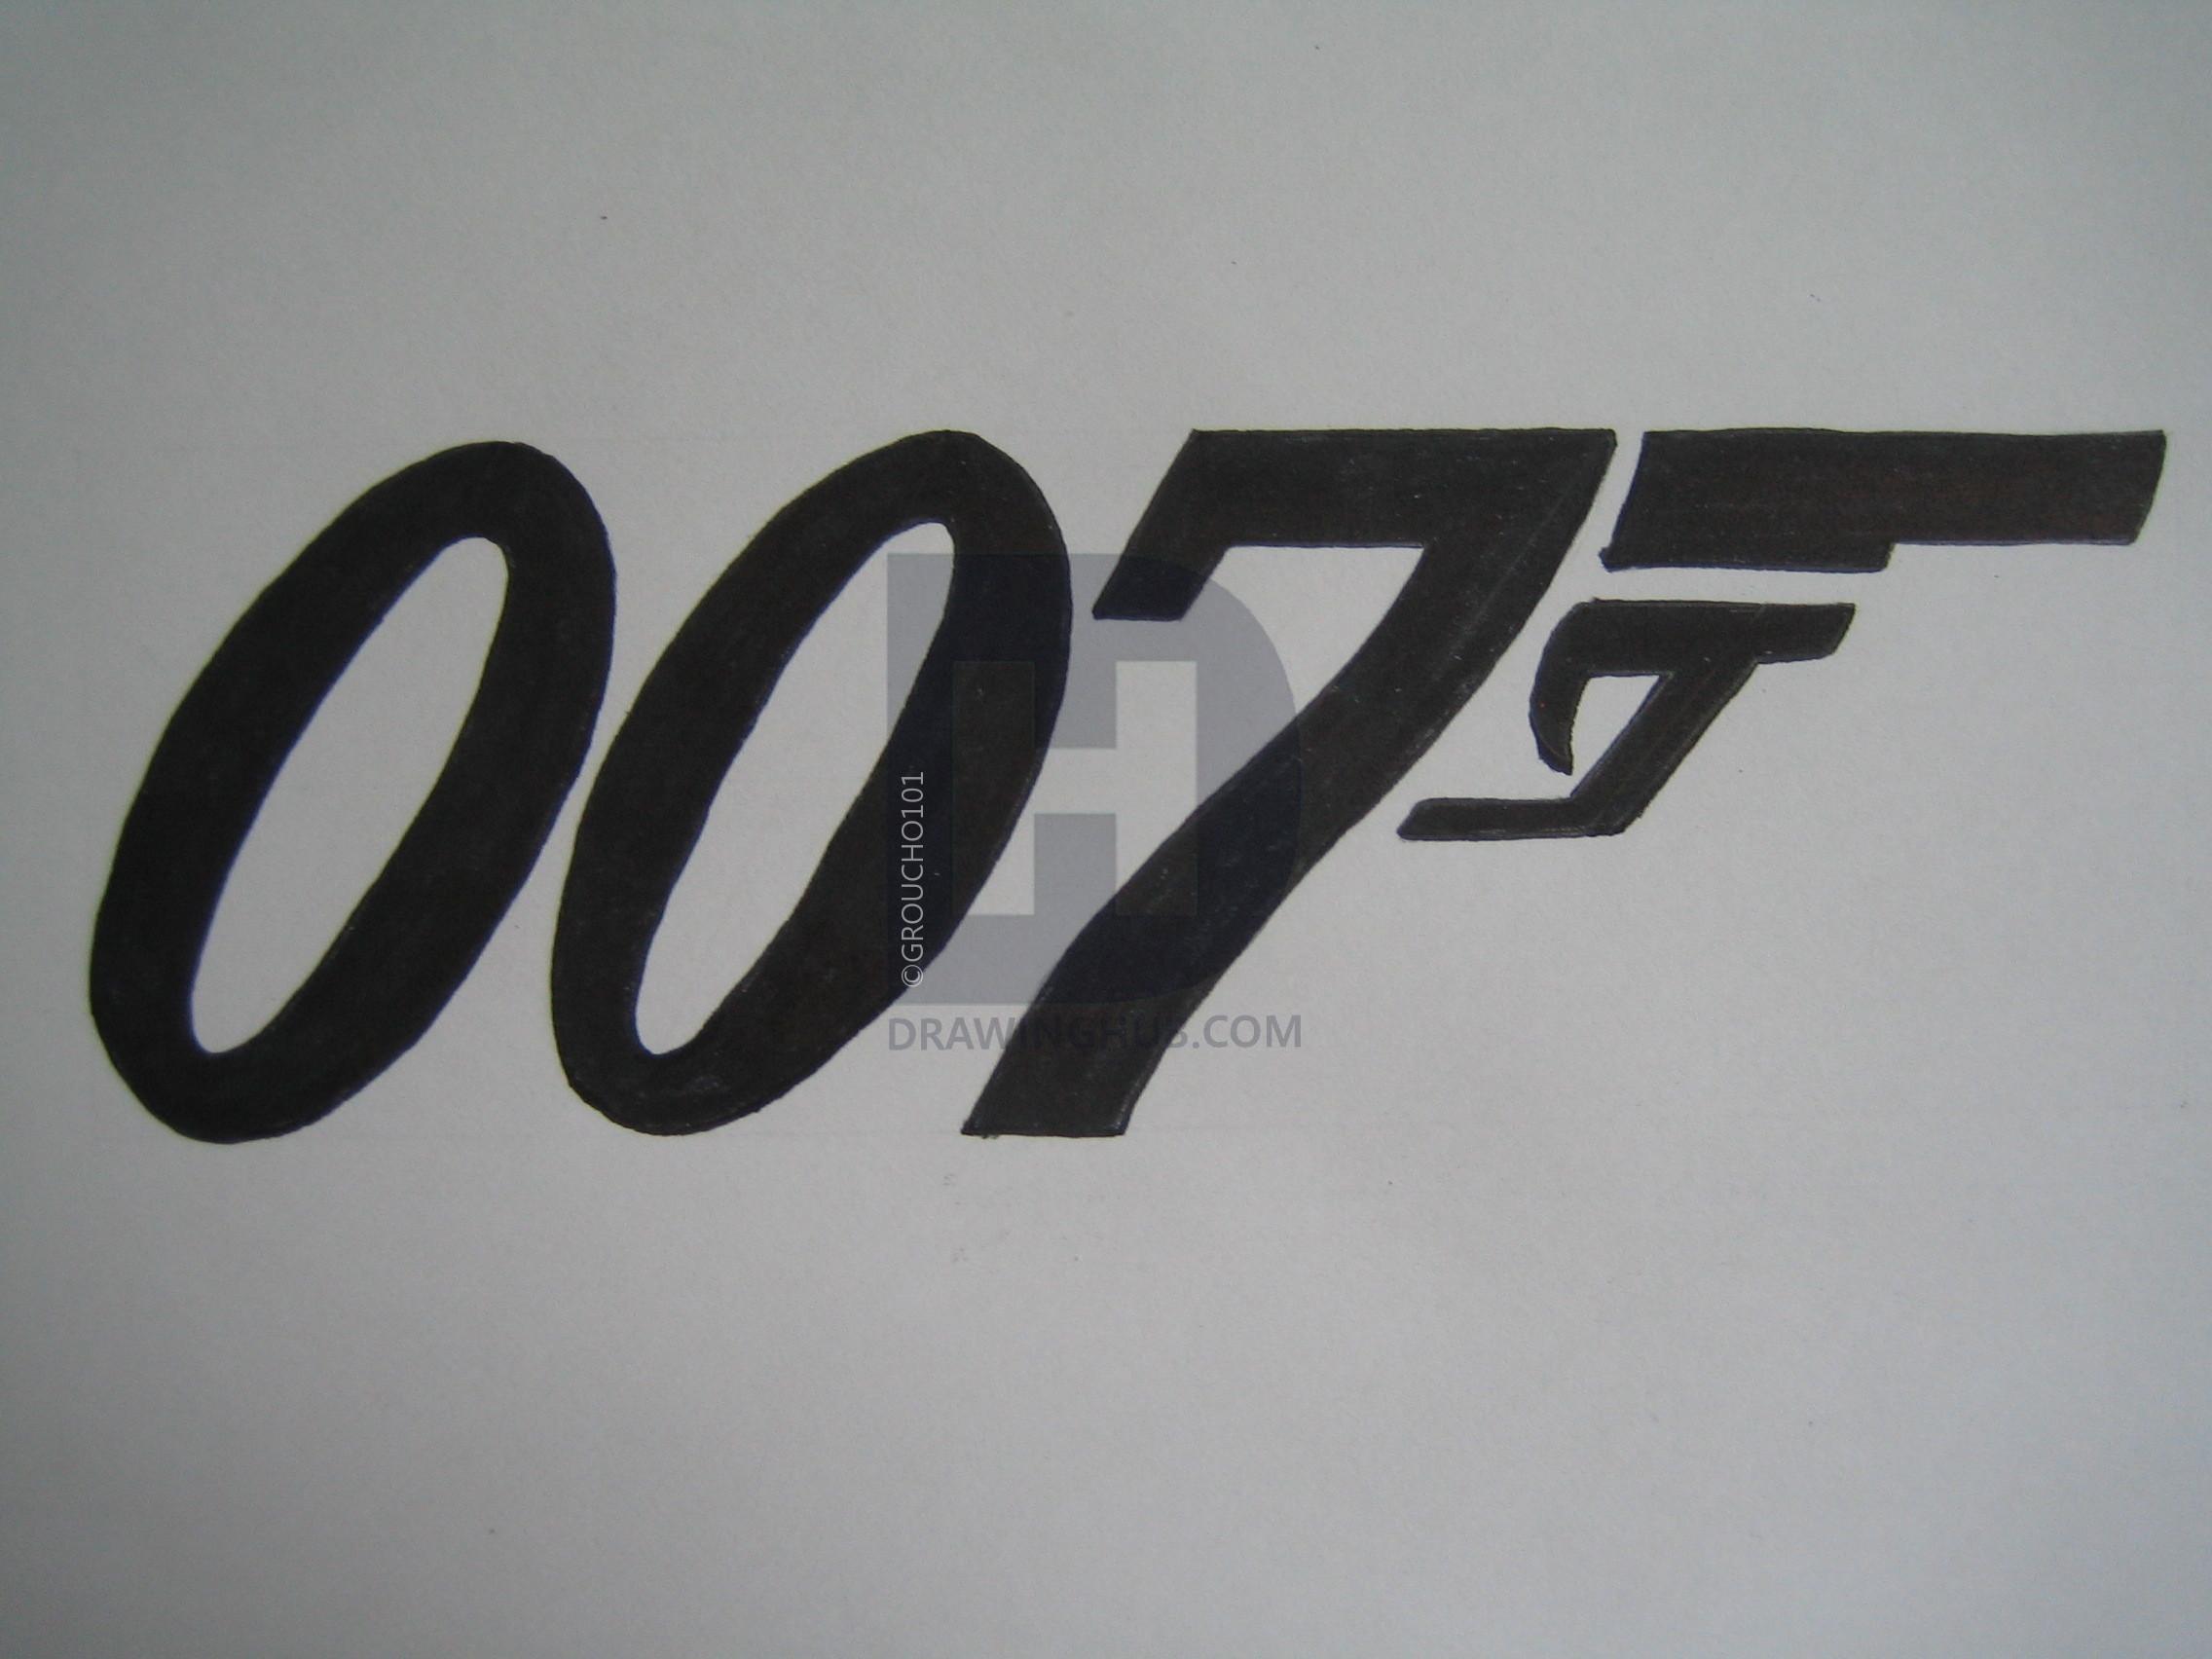 OO7 Logo - How To Draw The 007 Logo, Step by Step, Drawing Guide,